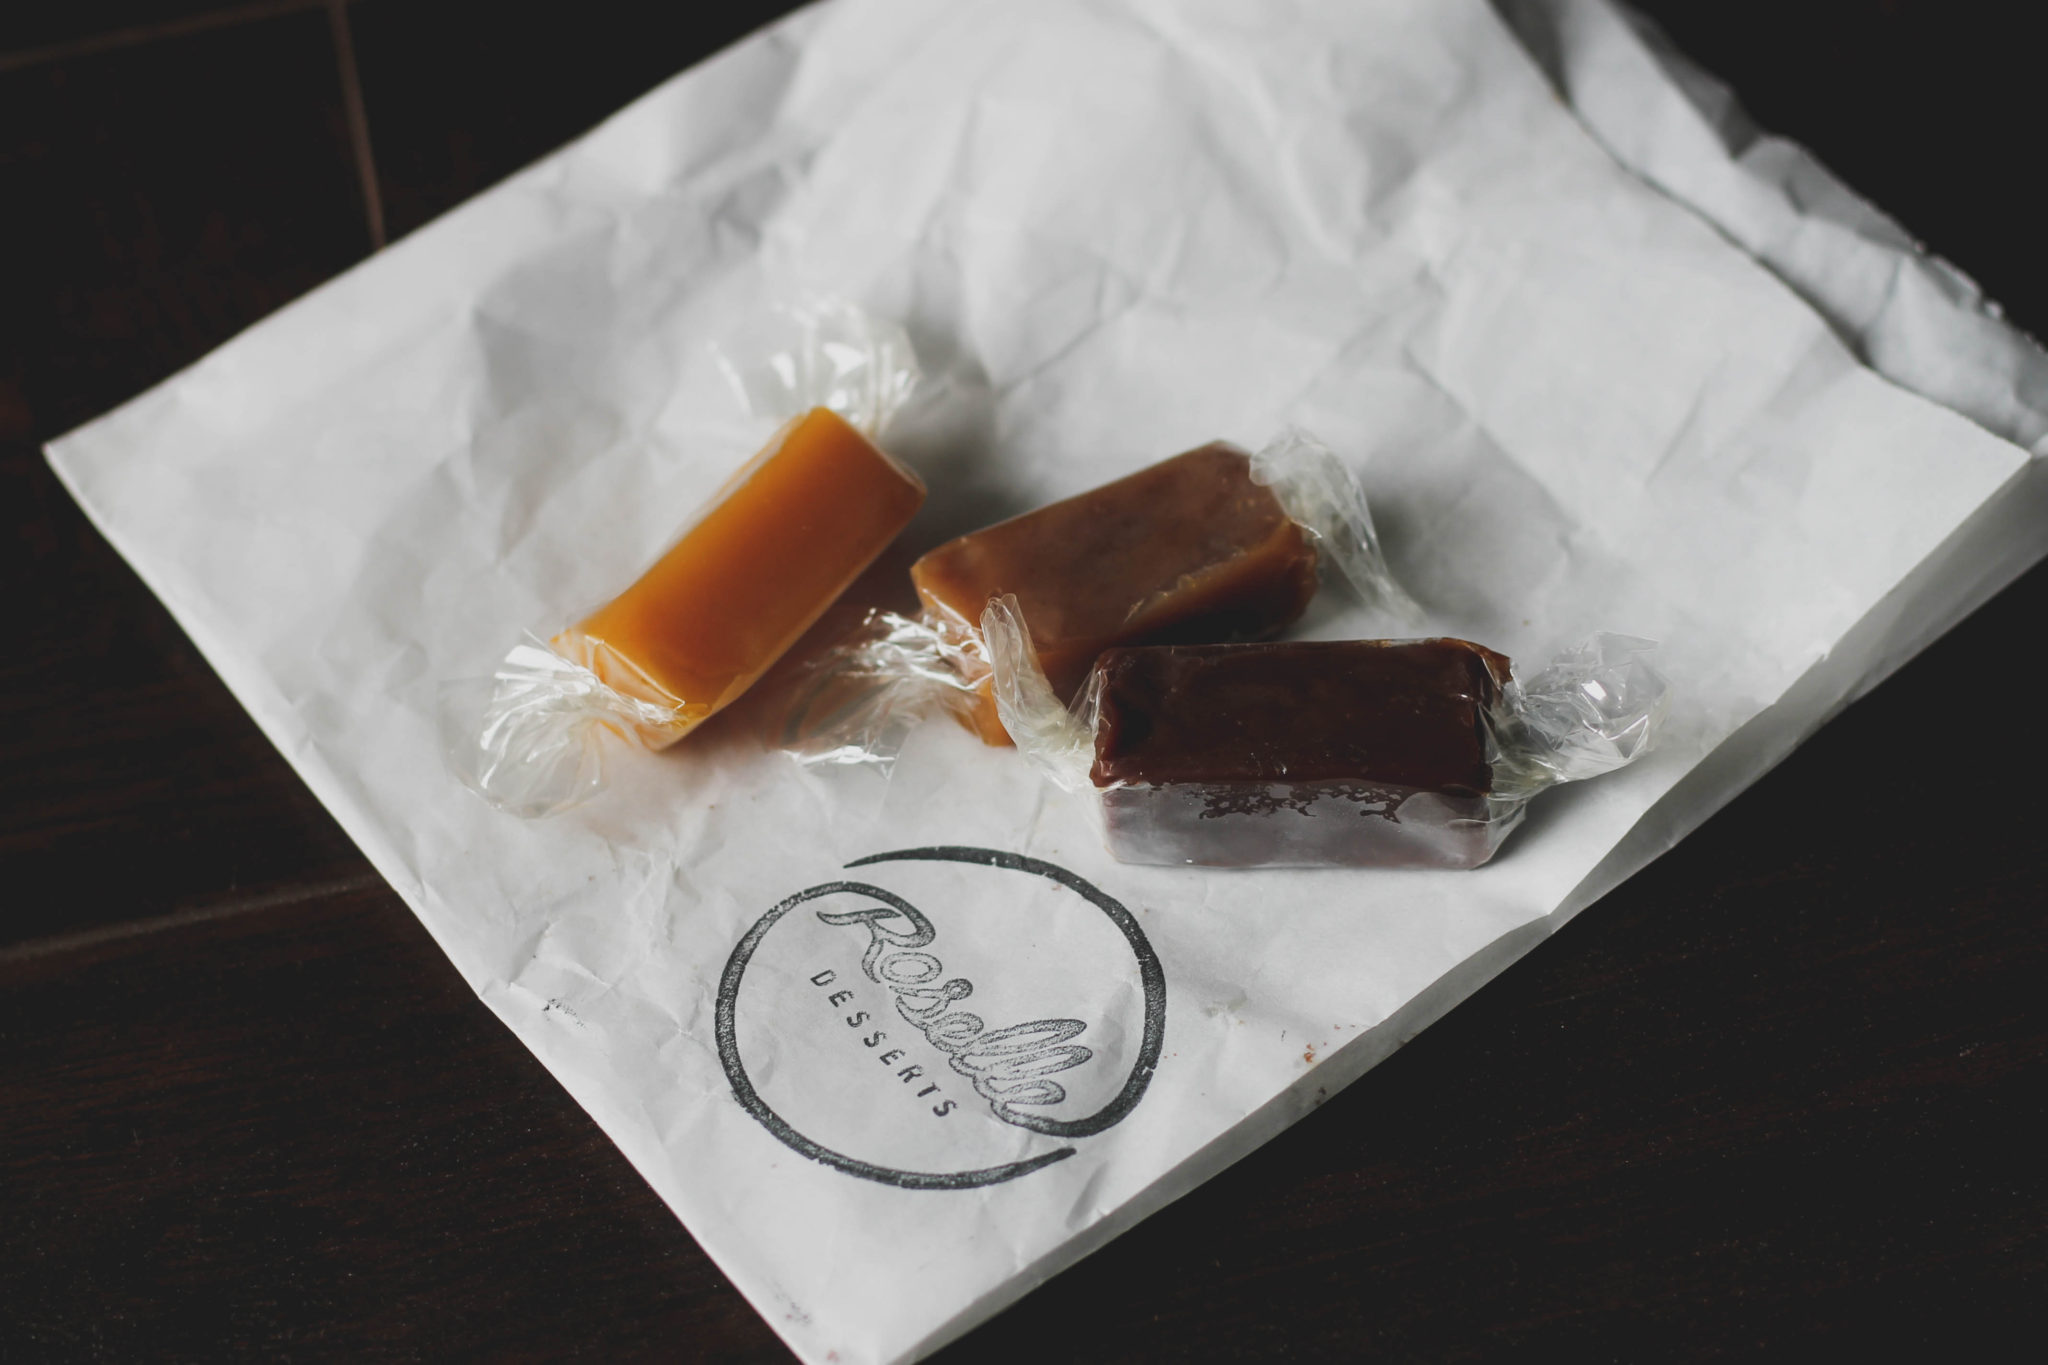 Three caramels in three flavours sitting on a white paper bag from Roselles bakery